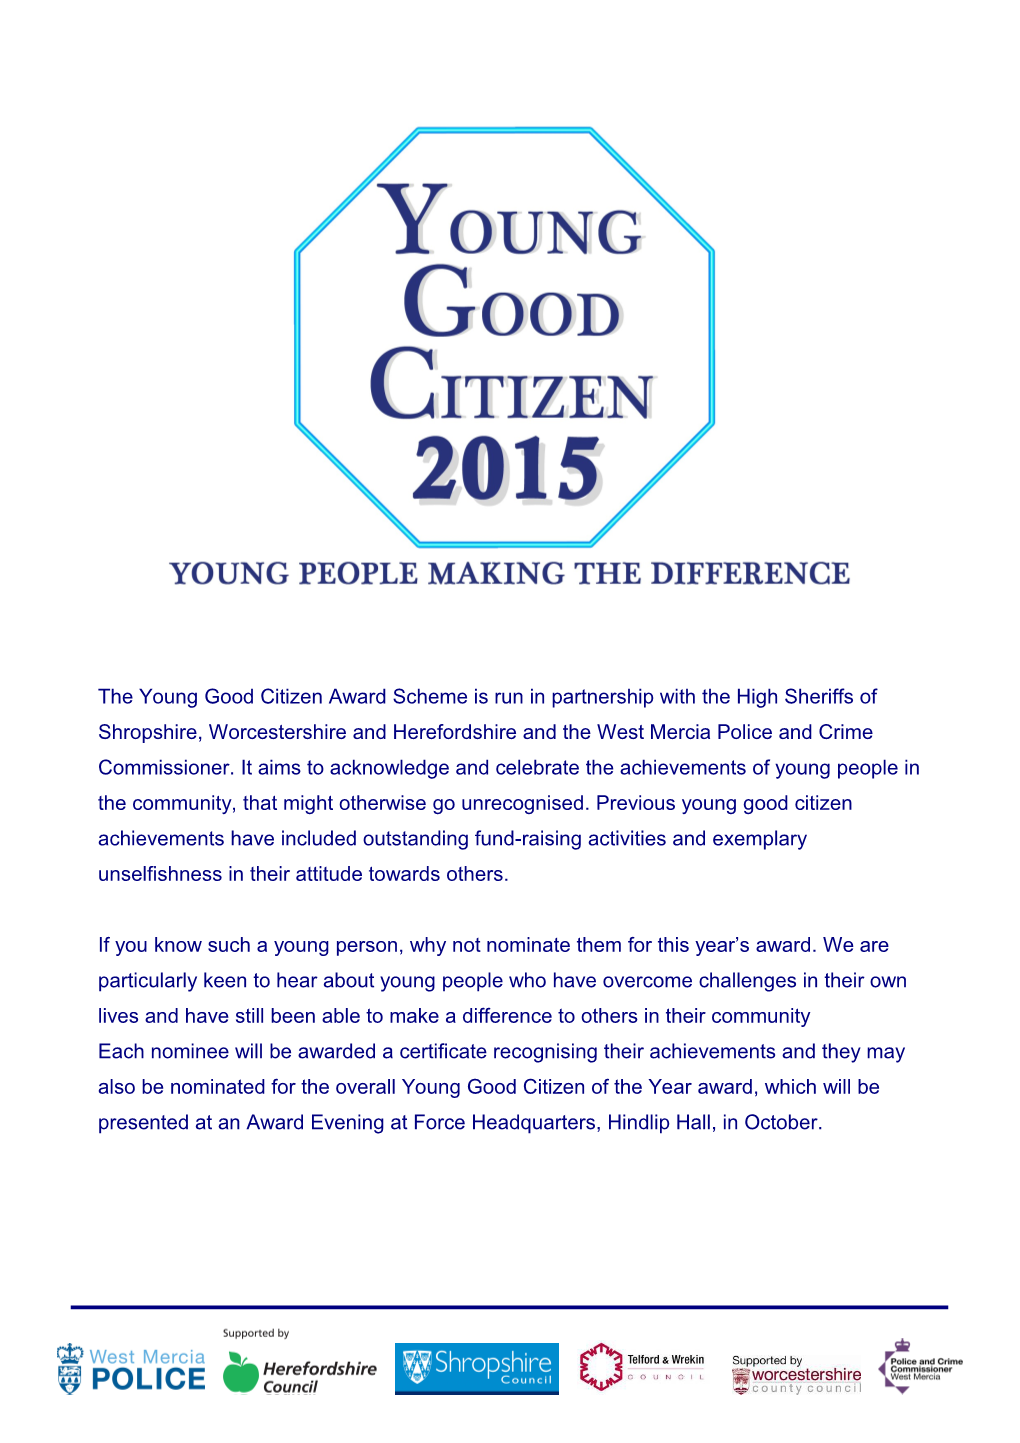 The Young Good Citizen Award Scheme Is Run by West Mercia Police in Partnership with The